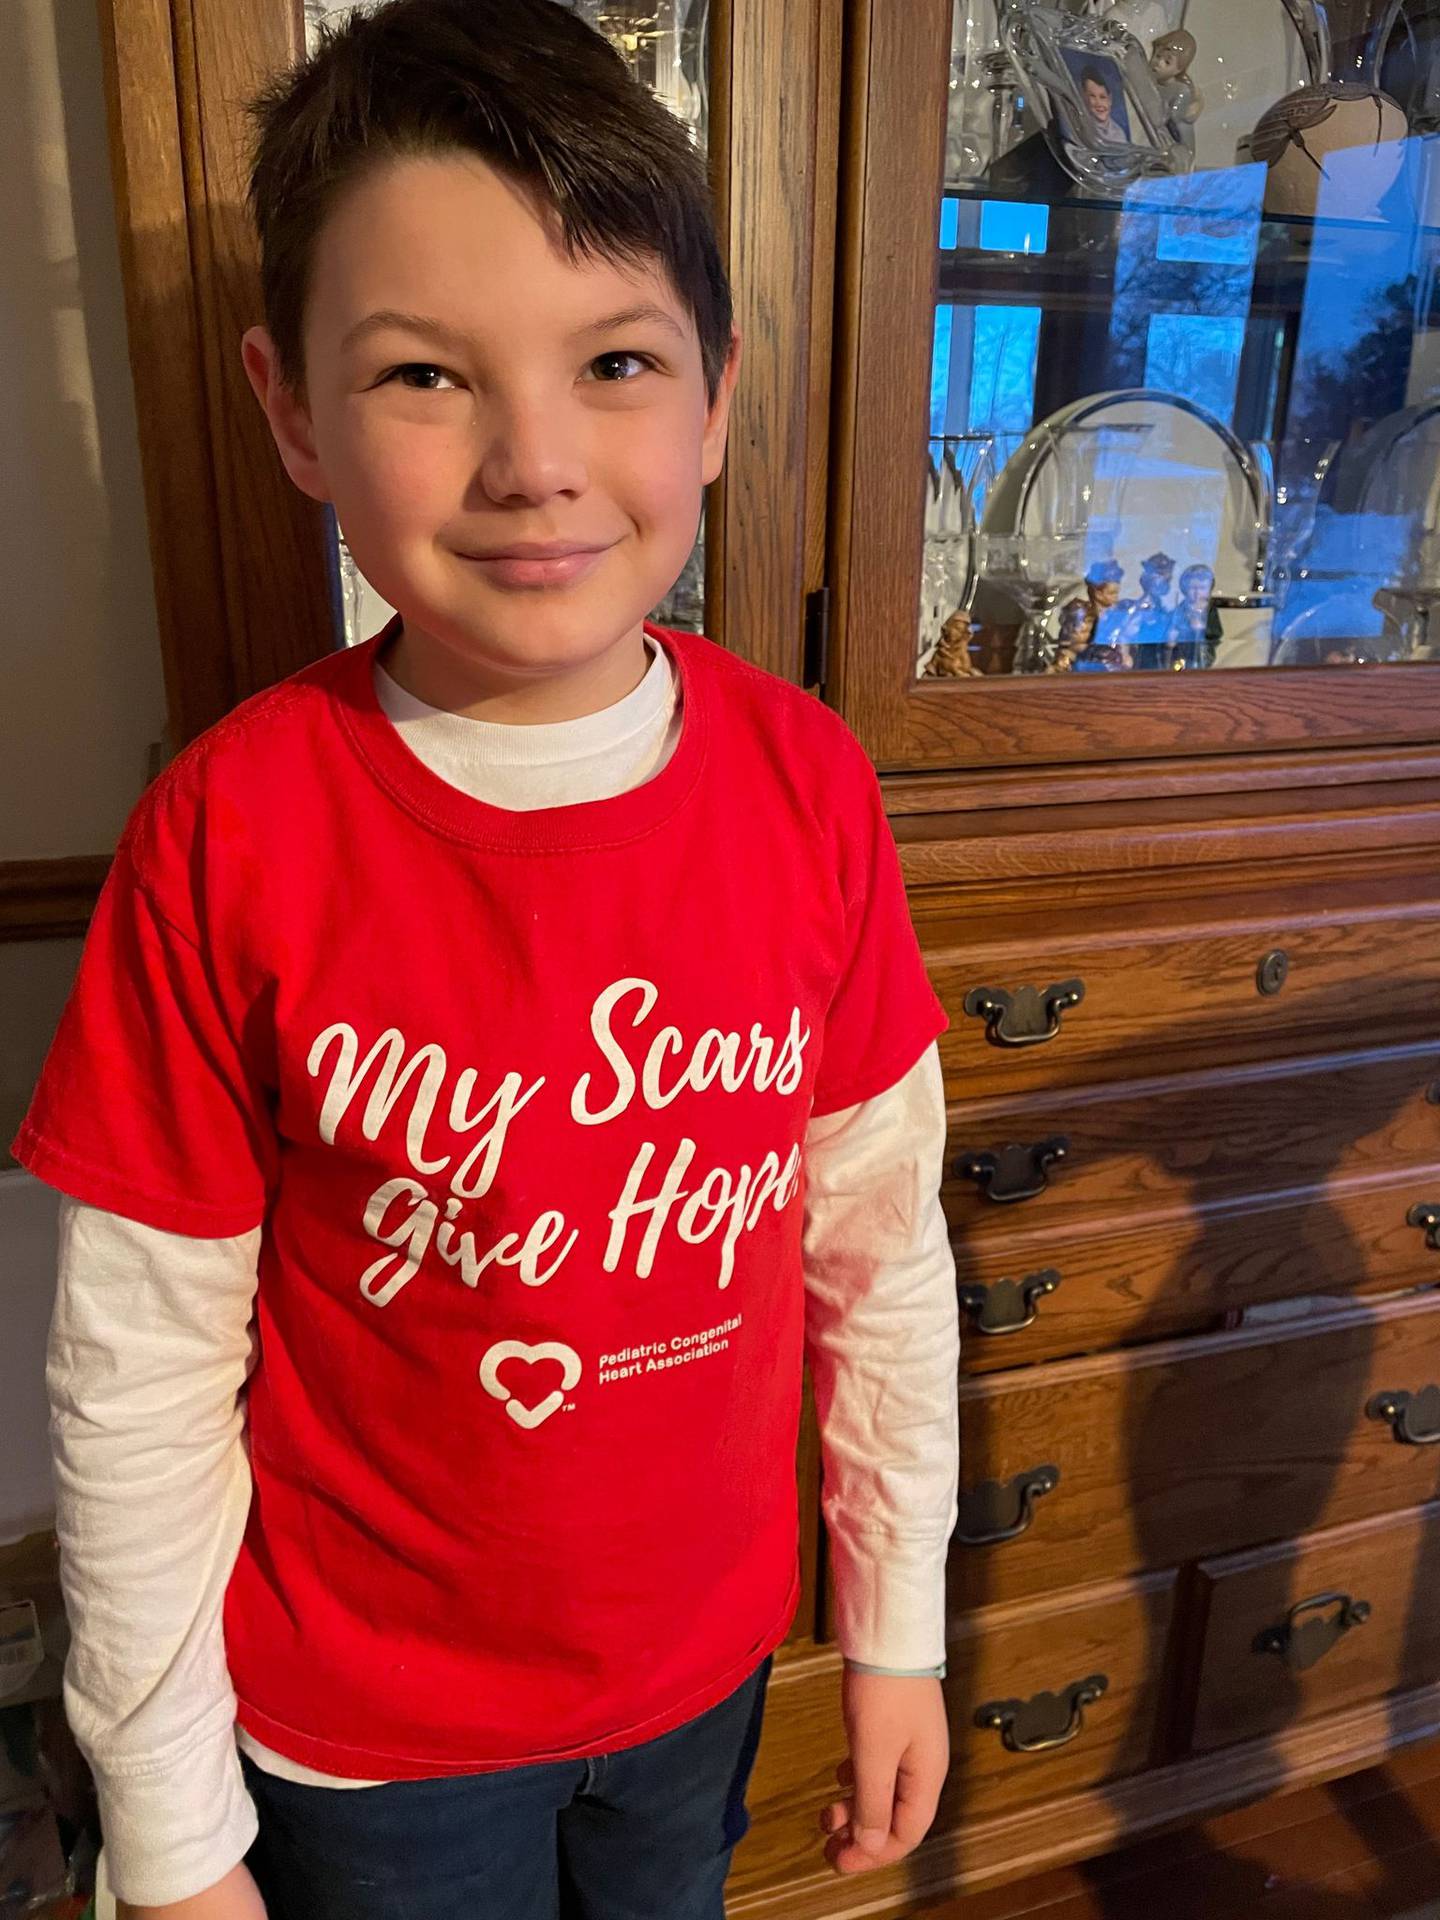 David Skelley, 7, of Homer Glen, had surgery to reconstruct his right pulmonary artery when he was 5 months old. He was previously diagnosed as failure to thrive. His parents Dave and Jenna Skelley had no idea David had a congenital heart disease until 36 hours before David's surgery.